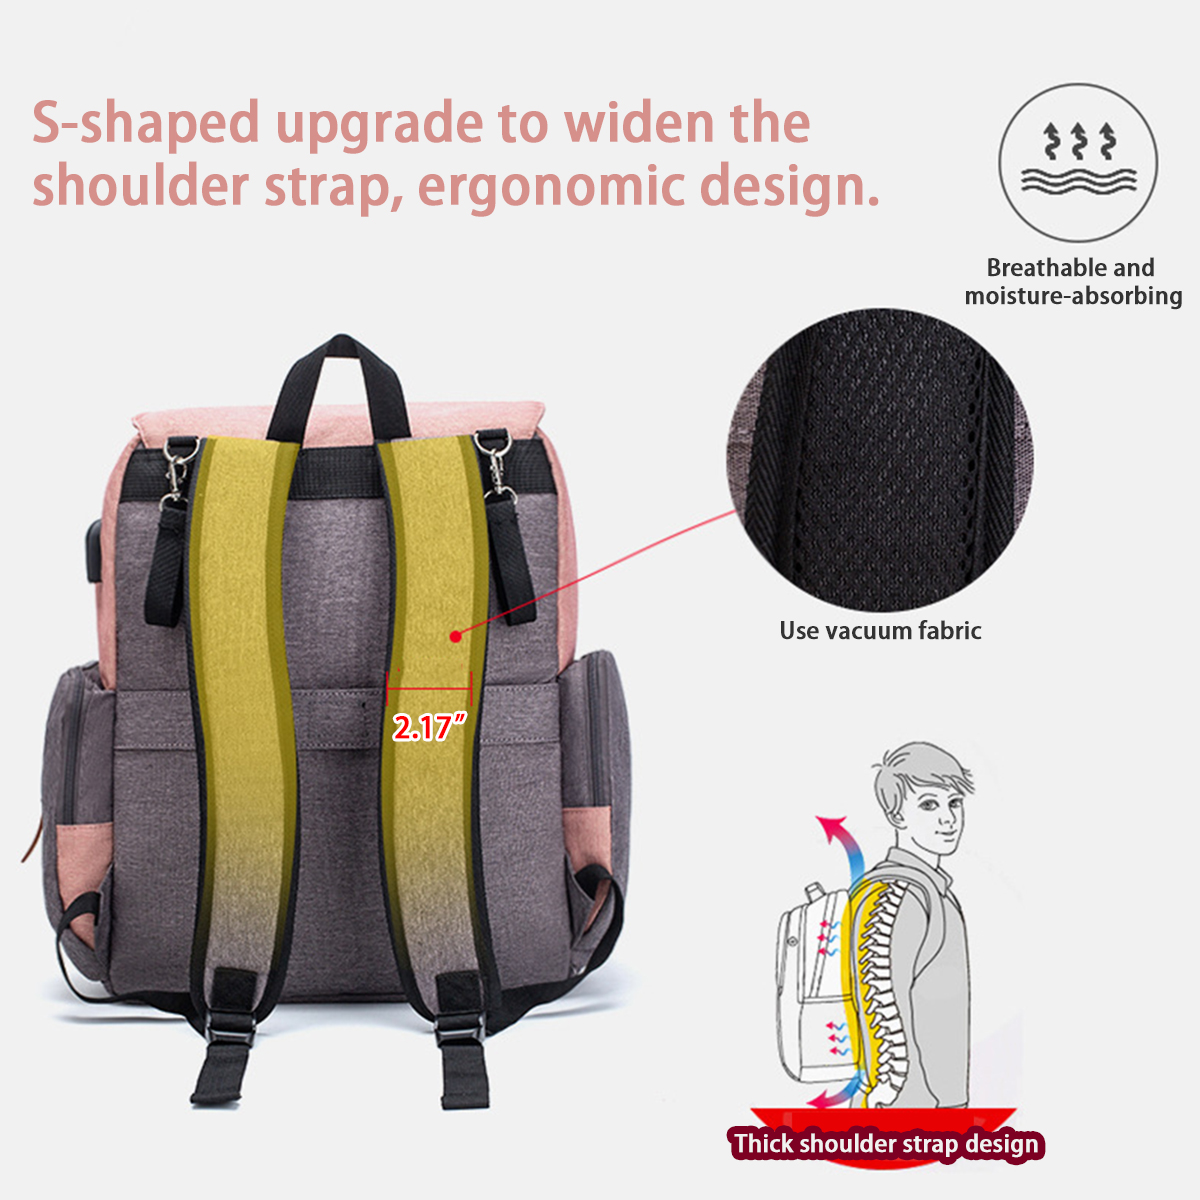 Multifunctional-Outdoor-Travel-Backpack-With-USB-Port-Large-Capacity-Waterproof-Shoulder-Bag-For-Out-1759292-4